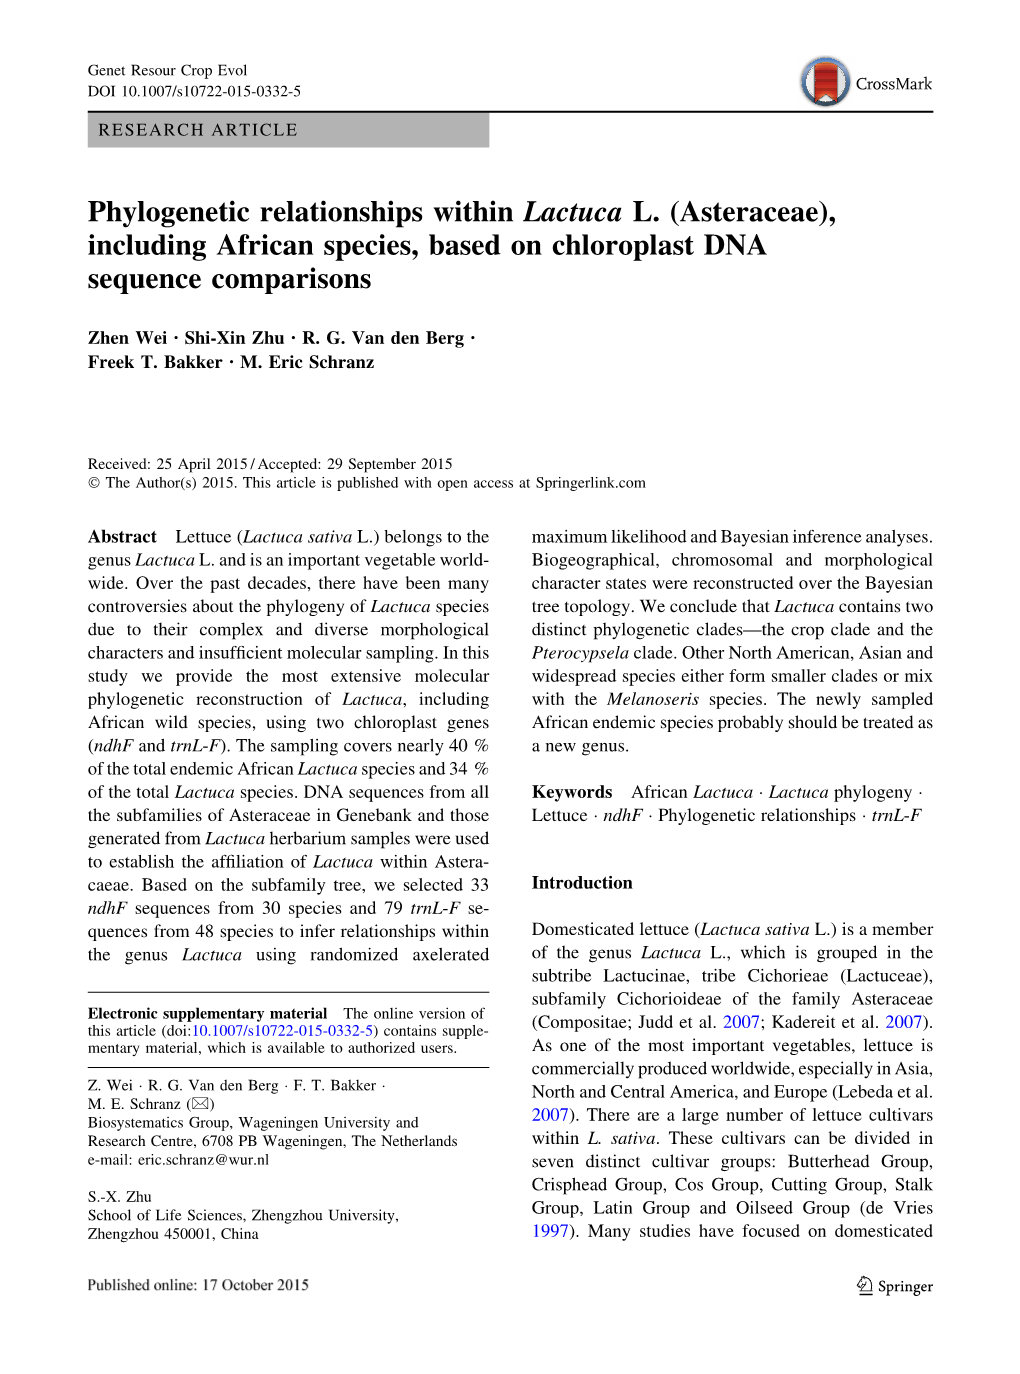 Phylogenetic Relationships Within Lactuca L. (Asteraceae), Including African Species, Based on Chloroplast DNA Sequence Comparisons